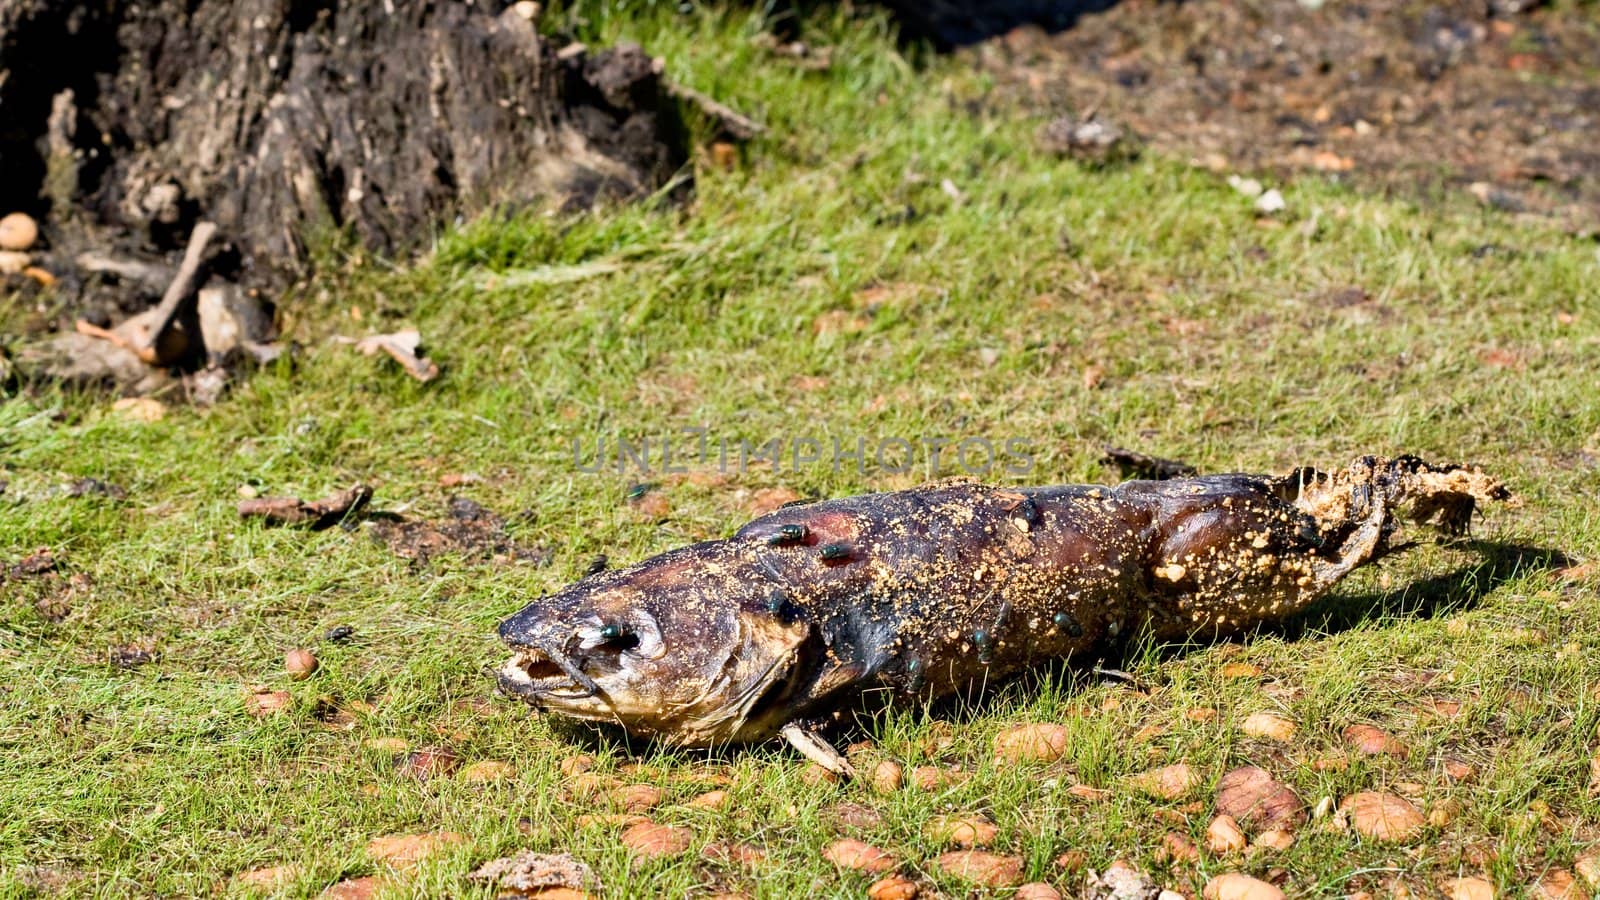 A dead freshwater fish washed up on land